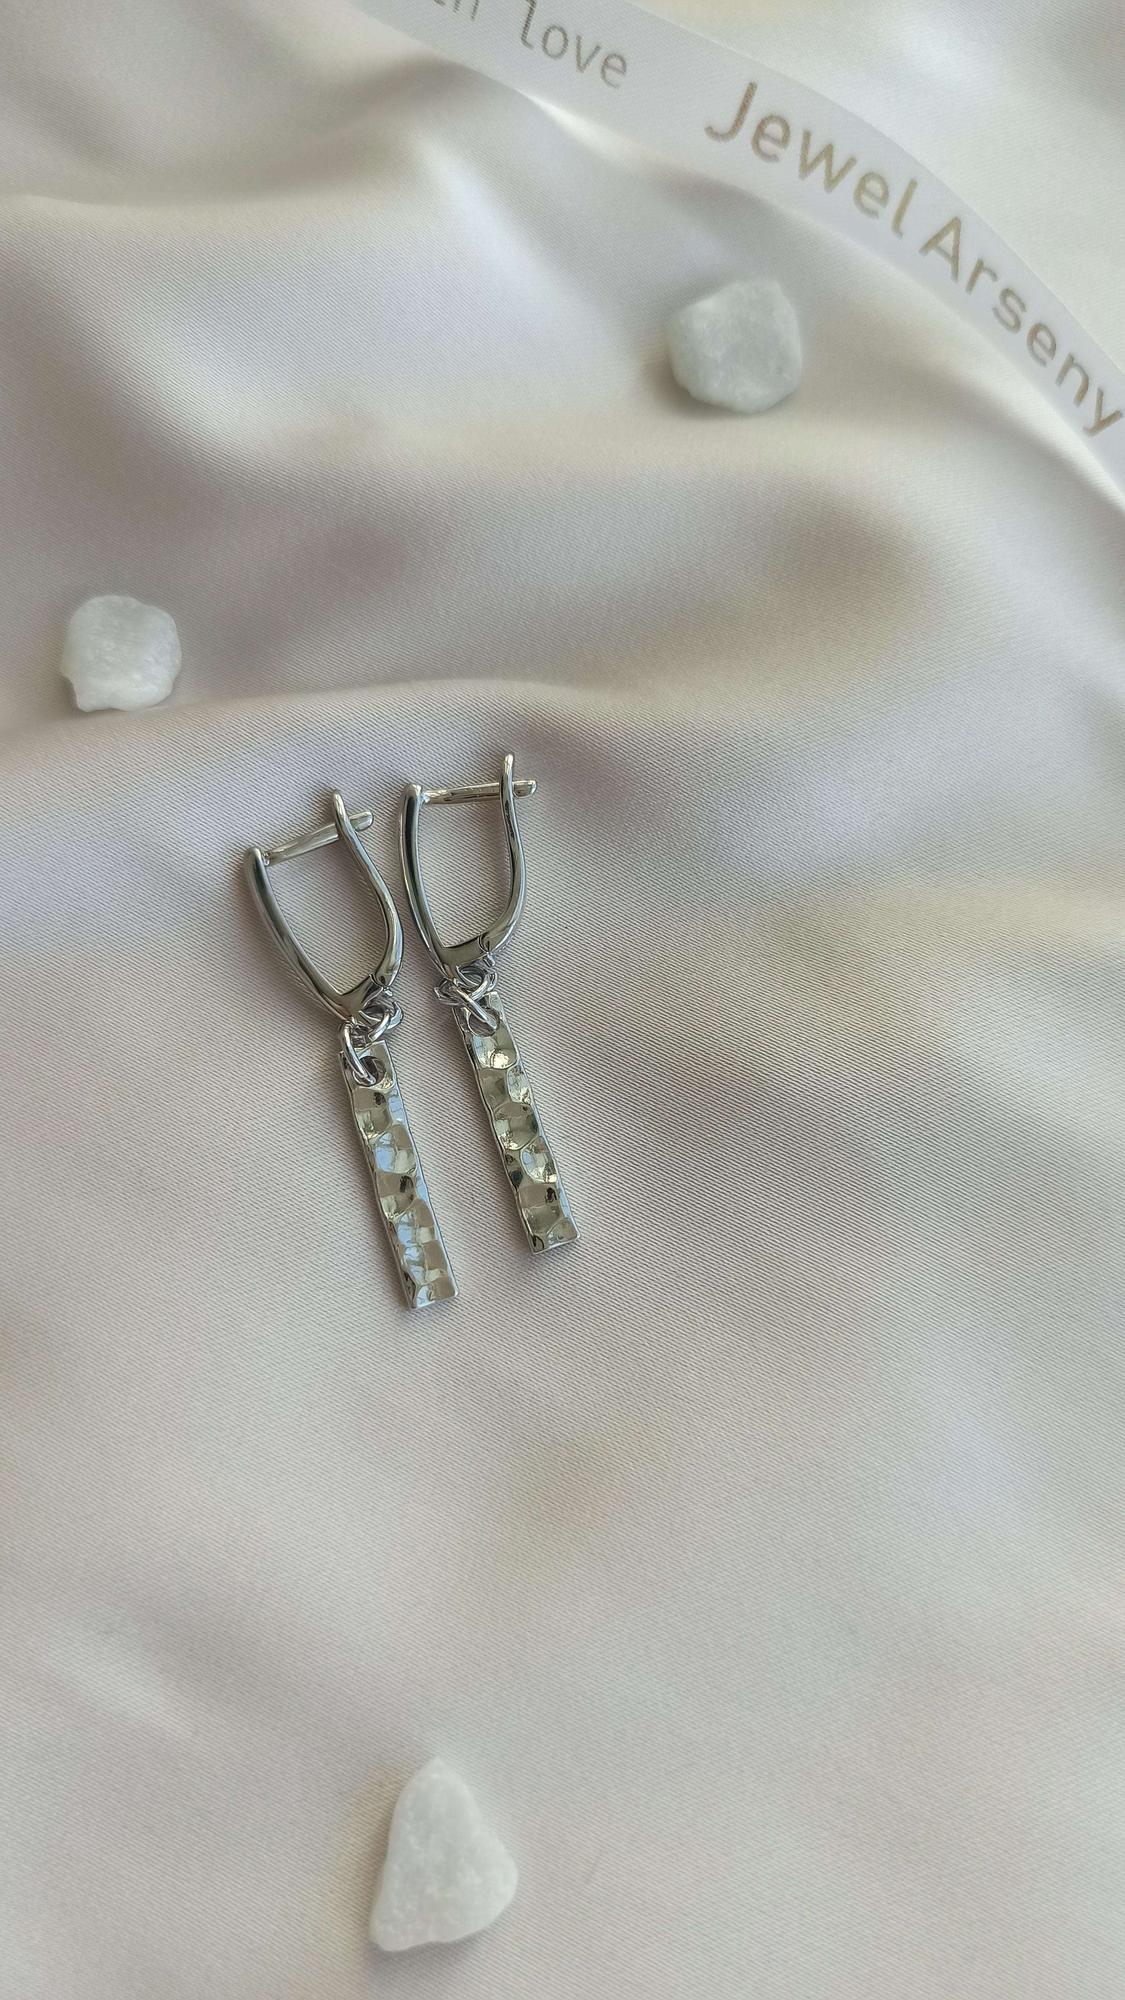 Sold at Auction: Vintage 925 Designer Jewelry Earrings